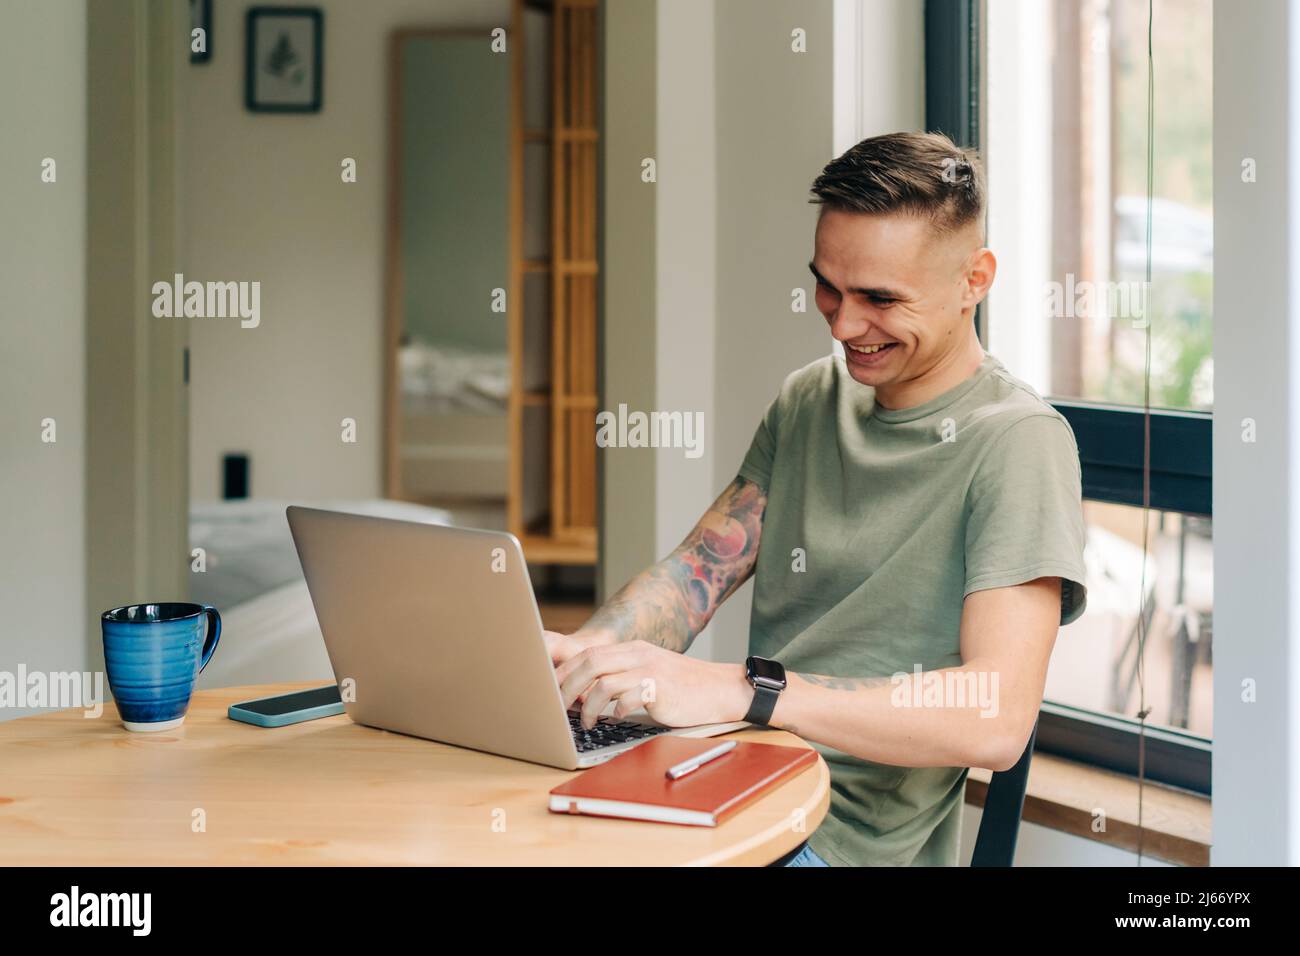 Cheerful laughing young man works on a laptop computer at a table at home. Stock Photo